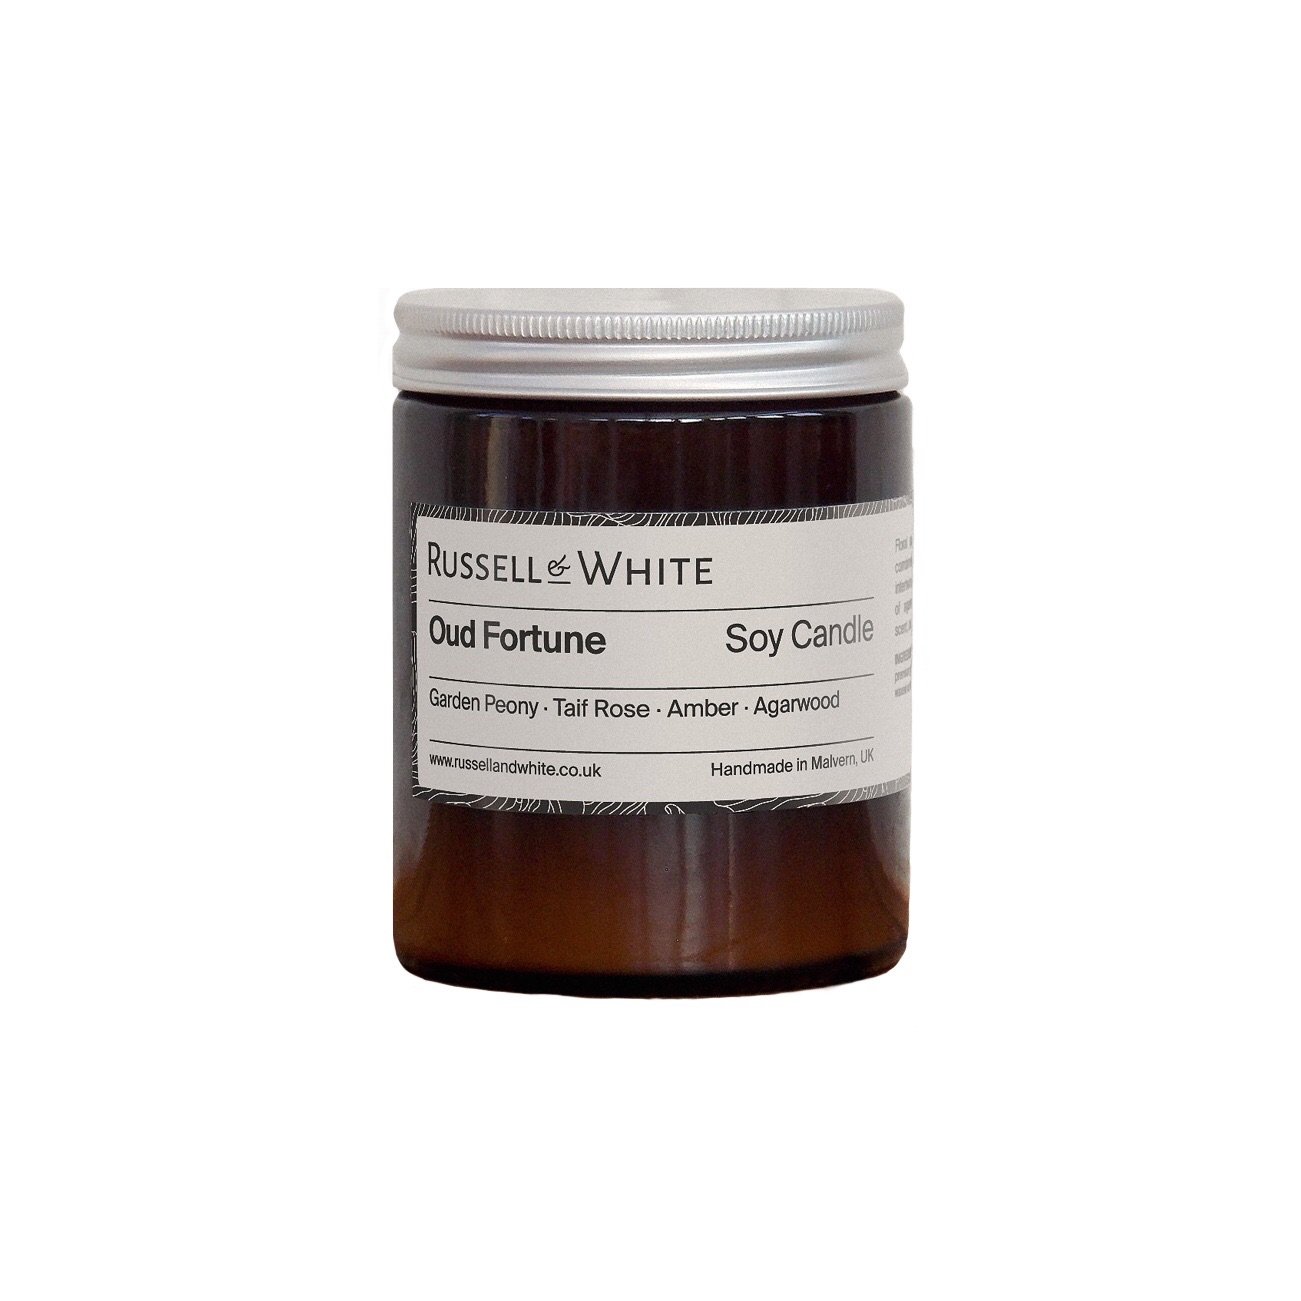 Russell & White Soy Wax Candle in Amber Glass Jar - Oud Fortune